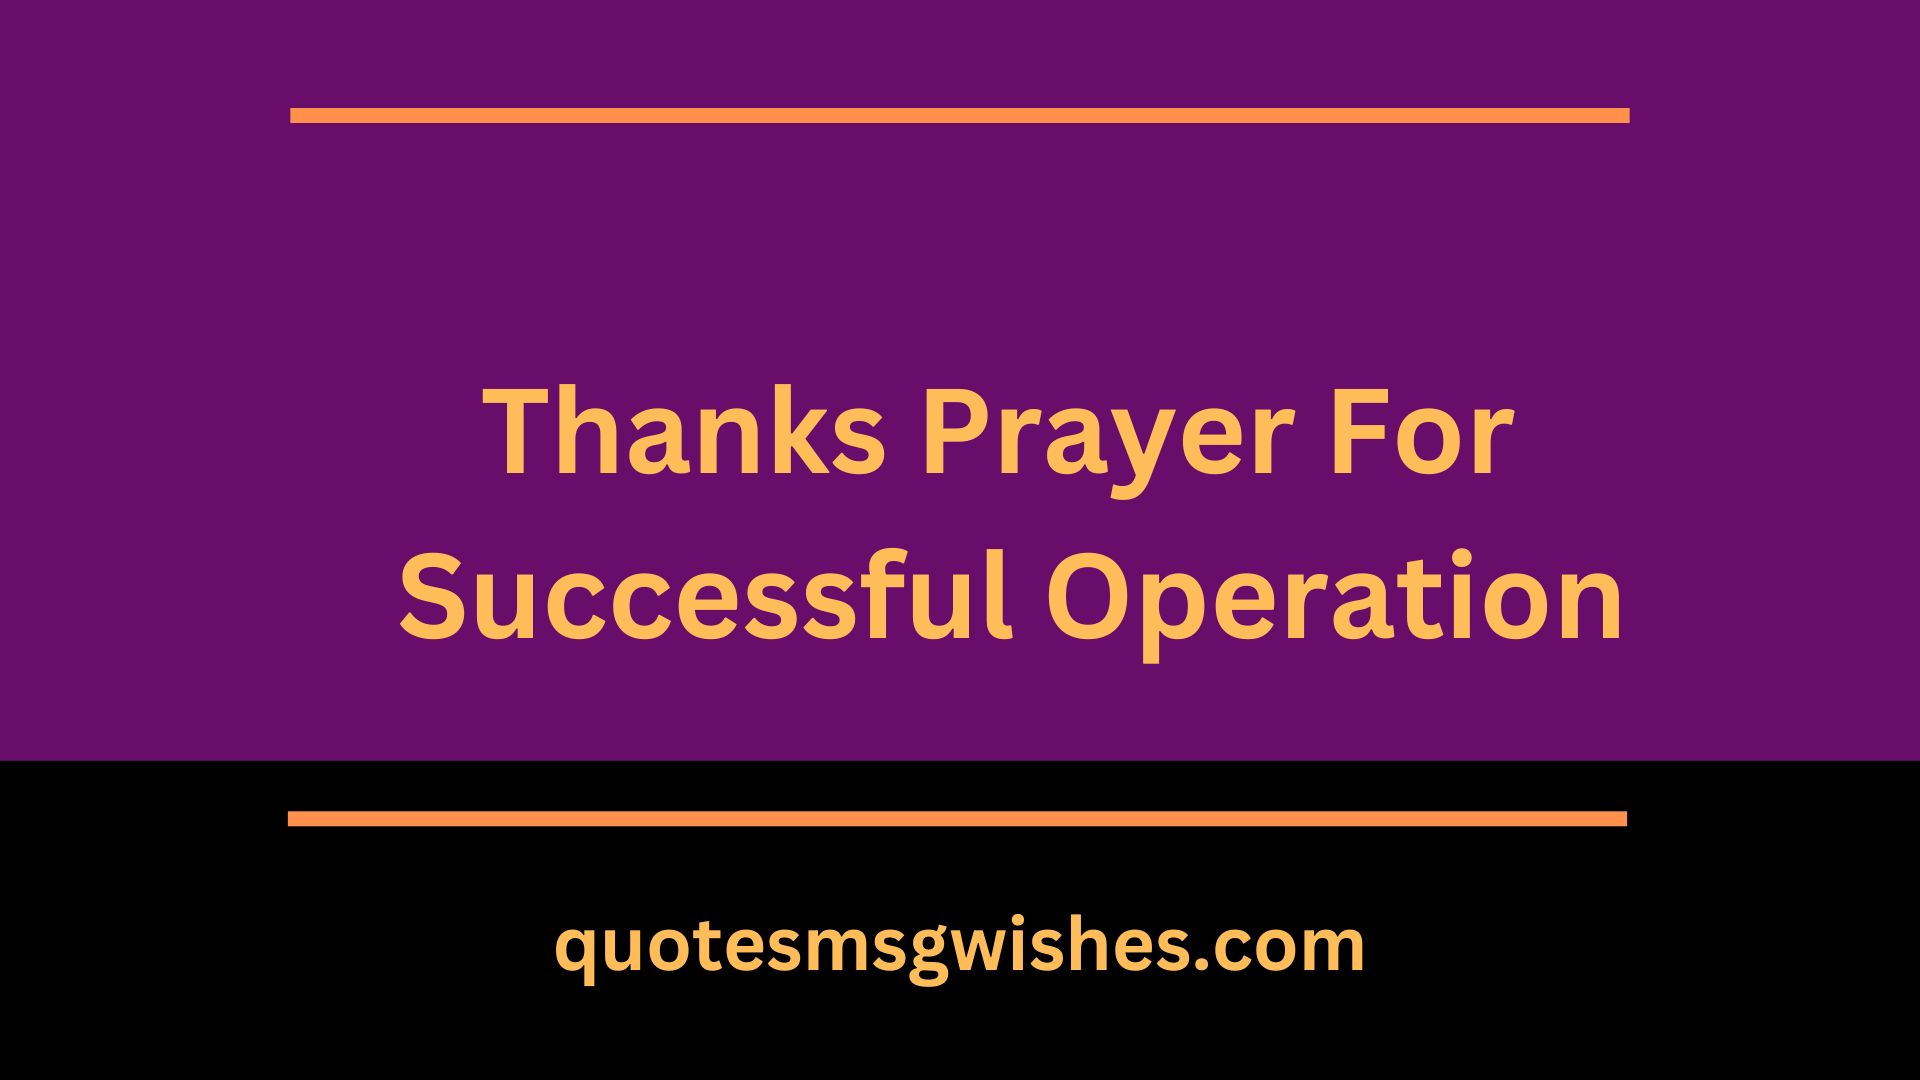 Thanks Prayer For Successful Operation